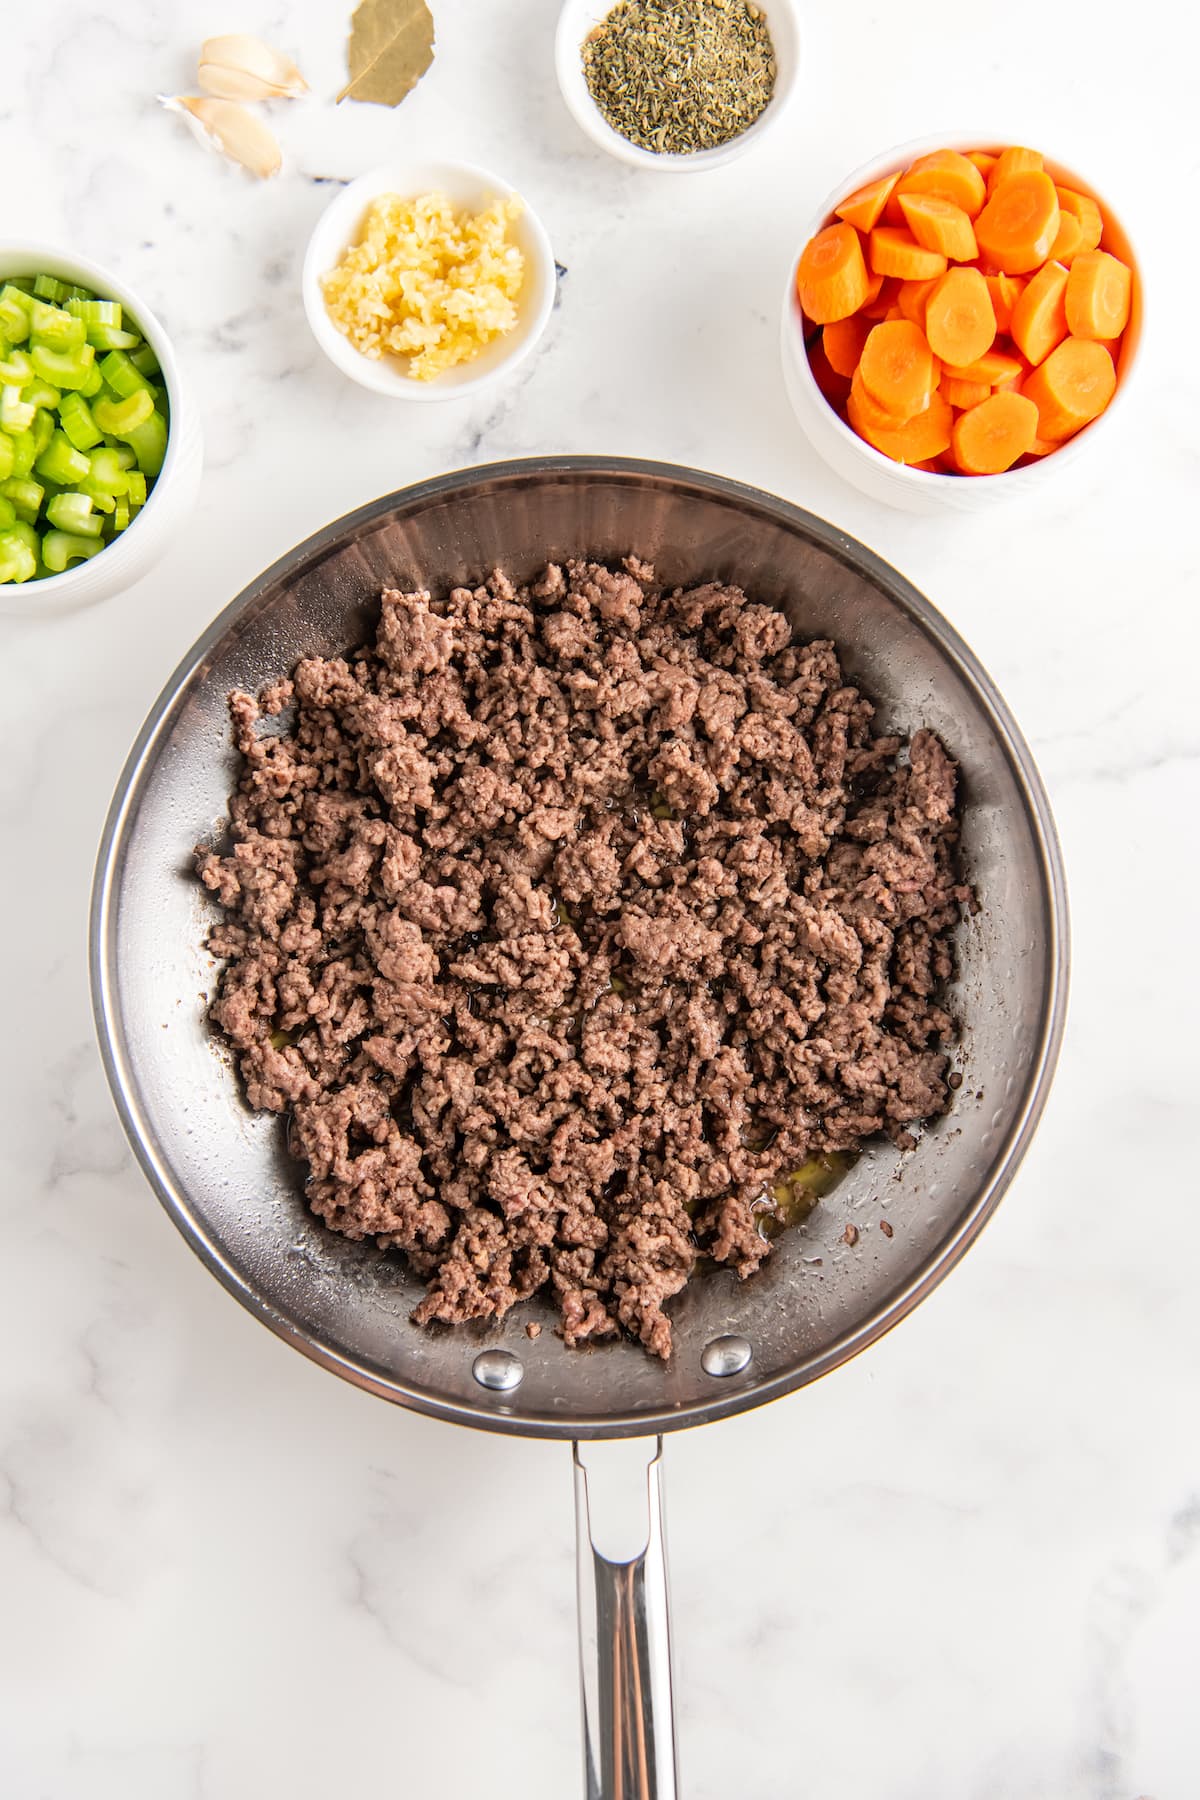 a bowl of ground beef next to small bowls of chopped vegetables